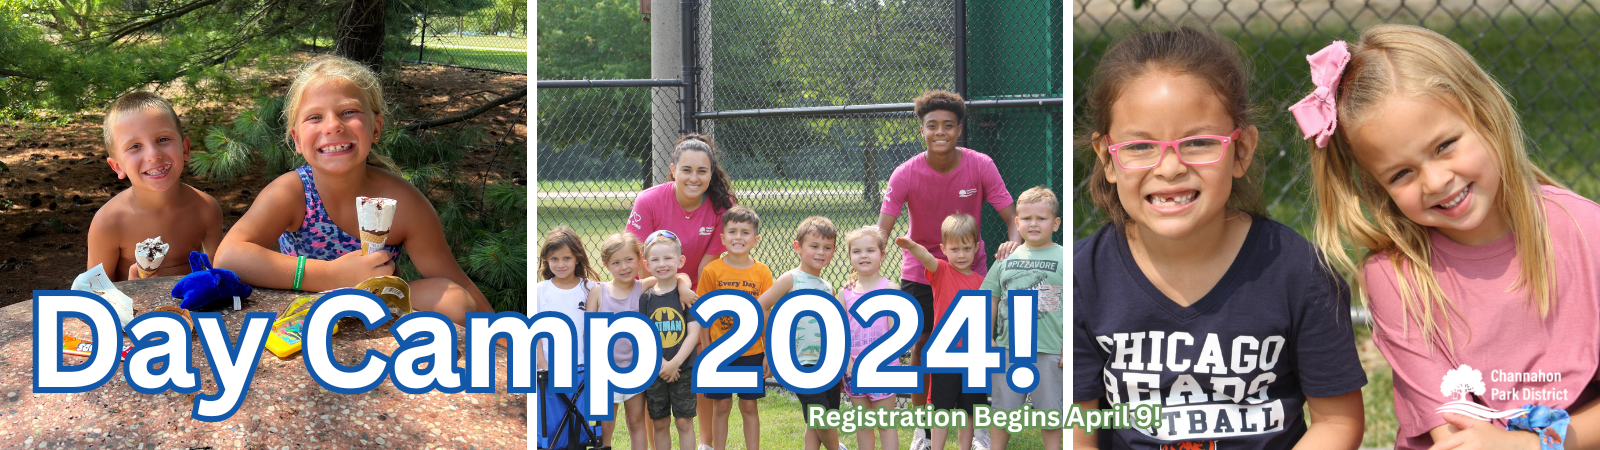 Day Camps 2022